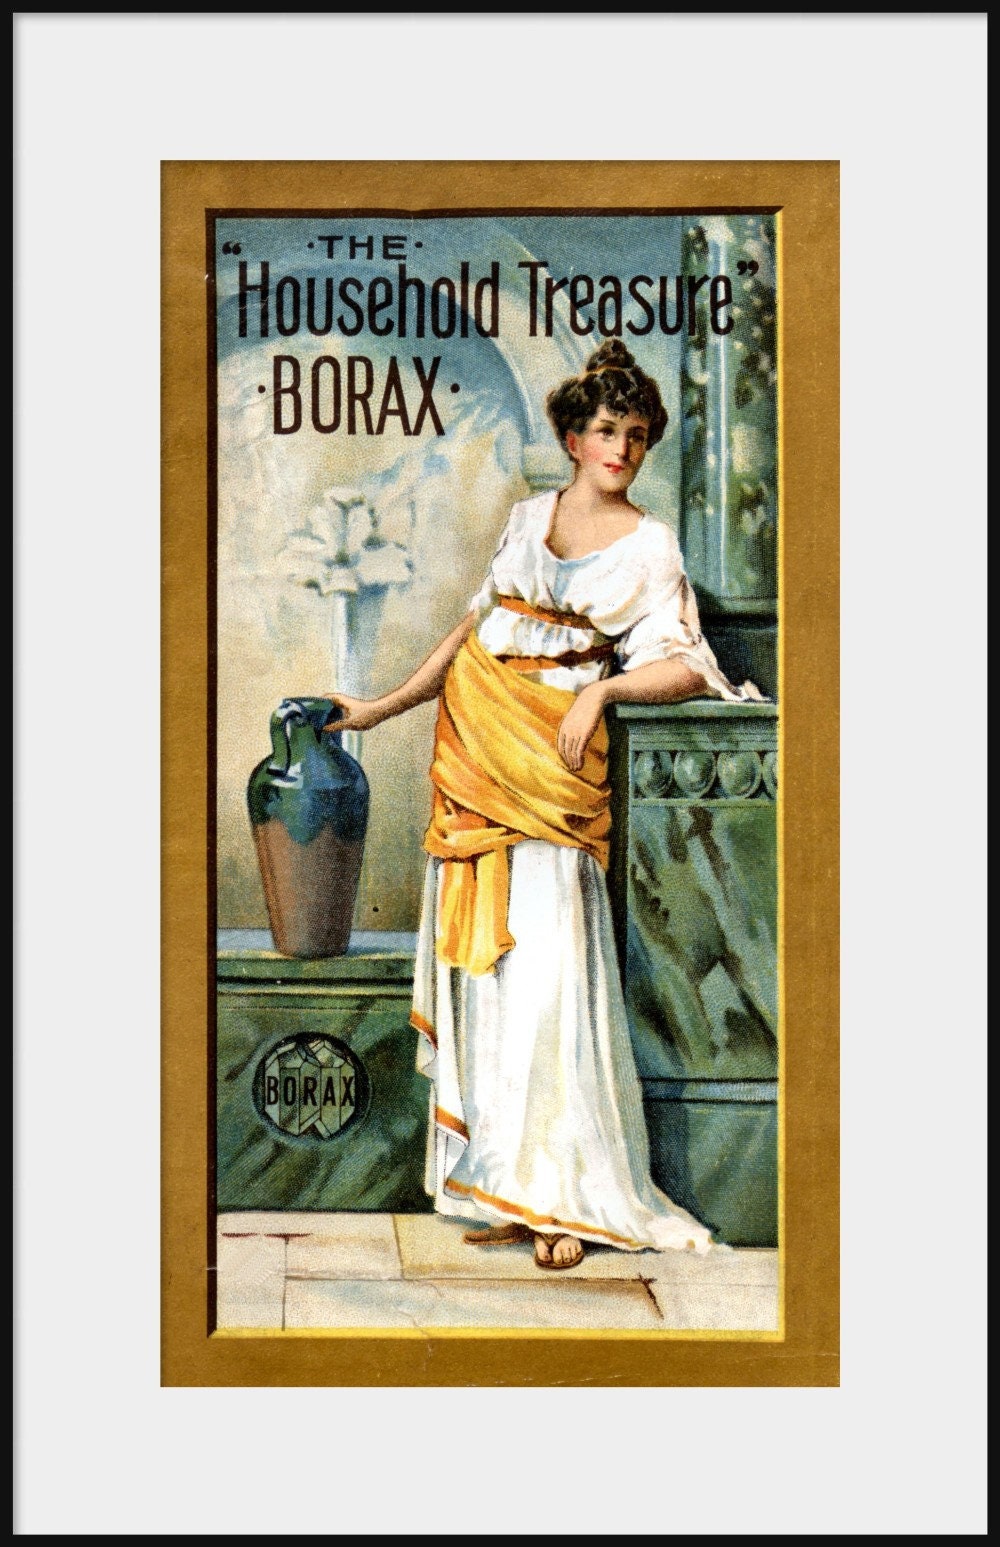 5 CARBOLIC SOAP Advertisement #2 New Fine Art Giclee Print CALVERT'S No Victorian Trade Card Kitchen Wall Art Decor Cleaning Woman,P218